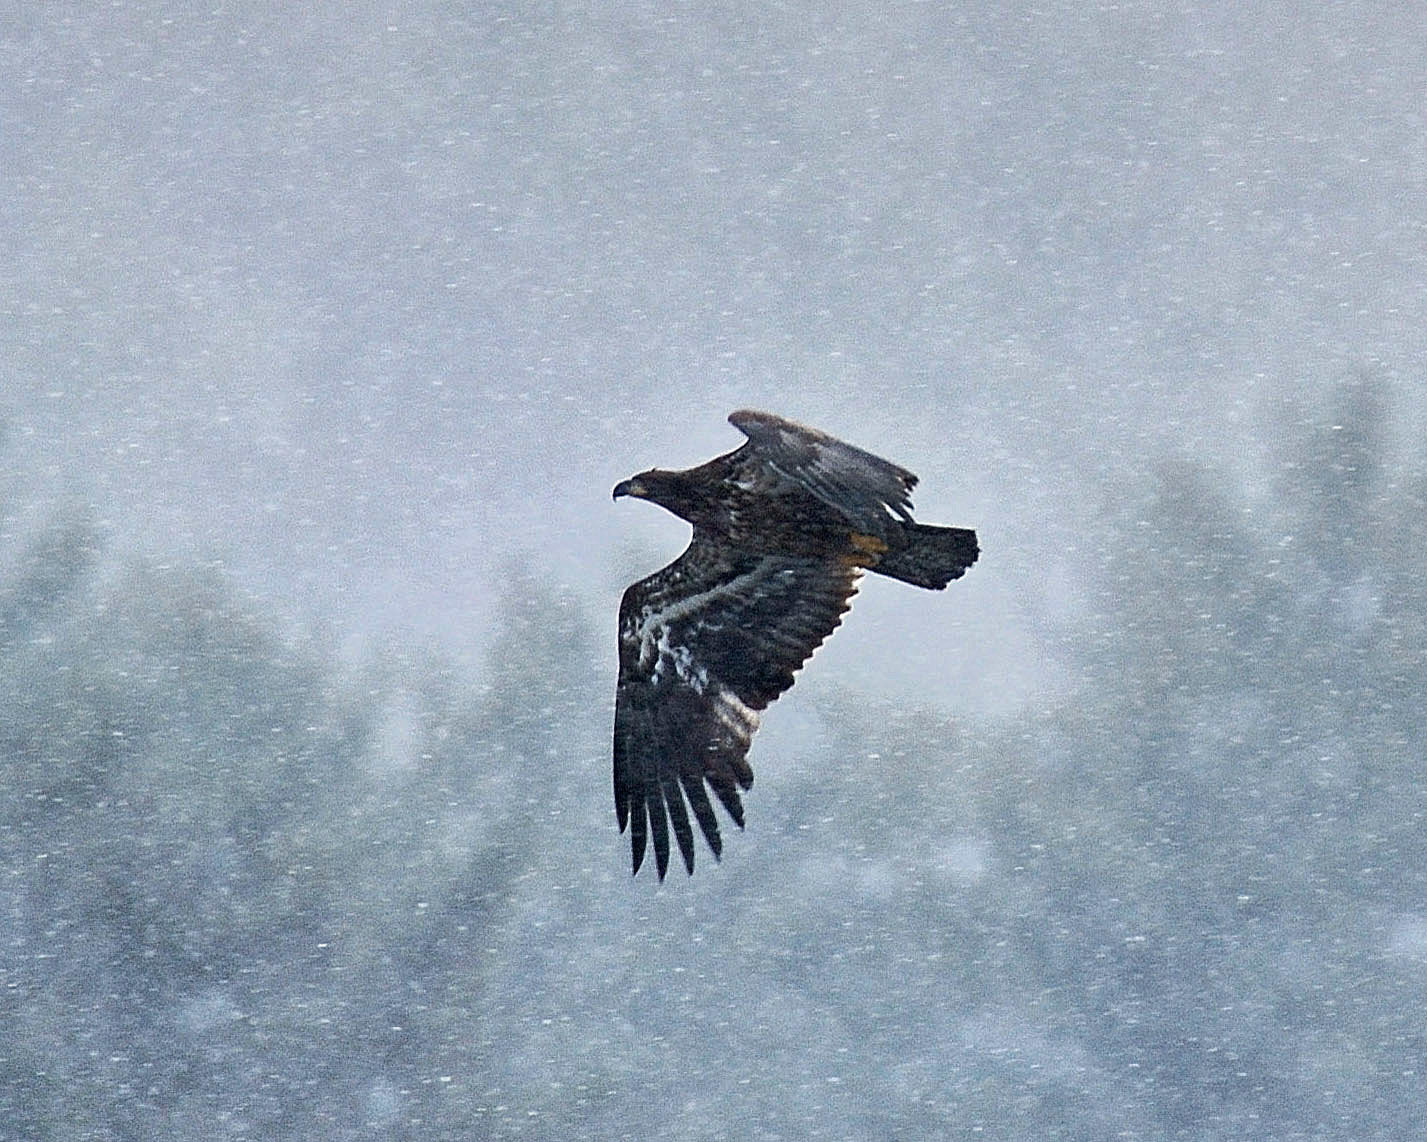 This immature bald eagle, probably one-and-a-half years old, is flying above the water near Mongaup Falls during a snow squall. There is usually enough water flow on the Mongaup River to keep some ice-free areas for eagles to forage. Eagles are opportunistic feeders, and they are not above feeding on a freshly killed animal carcass near a road. A few eagles get killed by vehicles in this manner; keep an eye out and slow down if you see a carcass near the road.